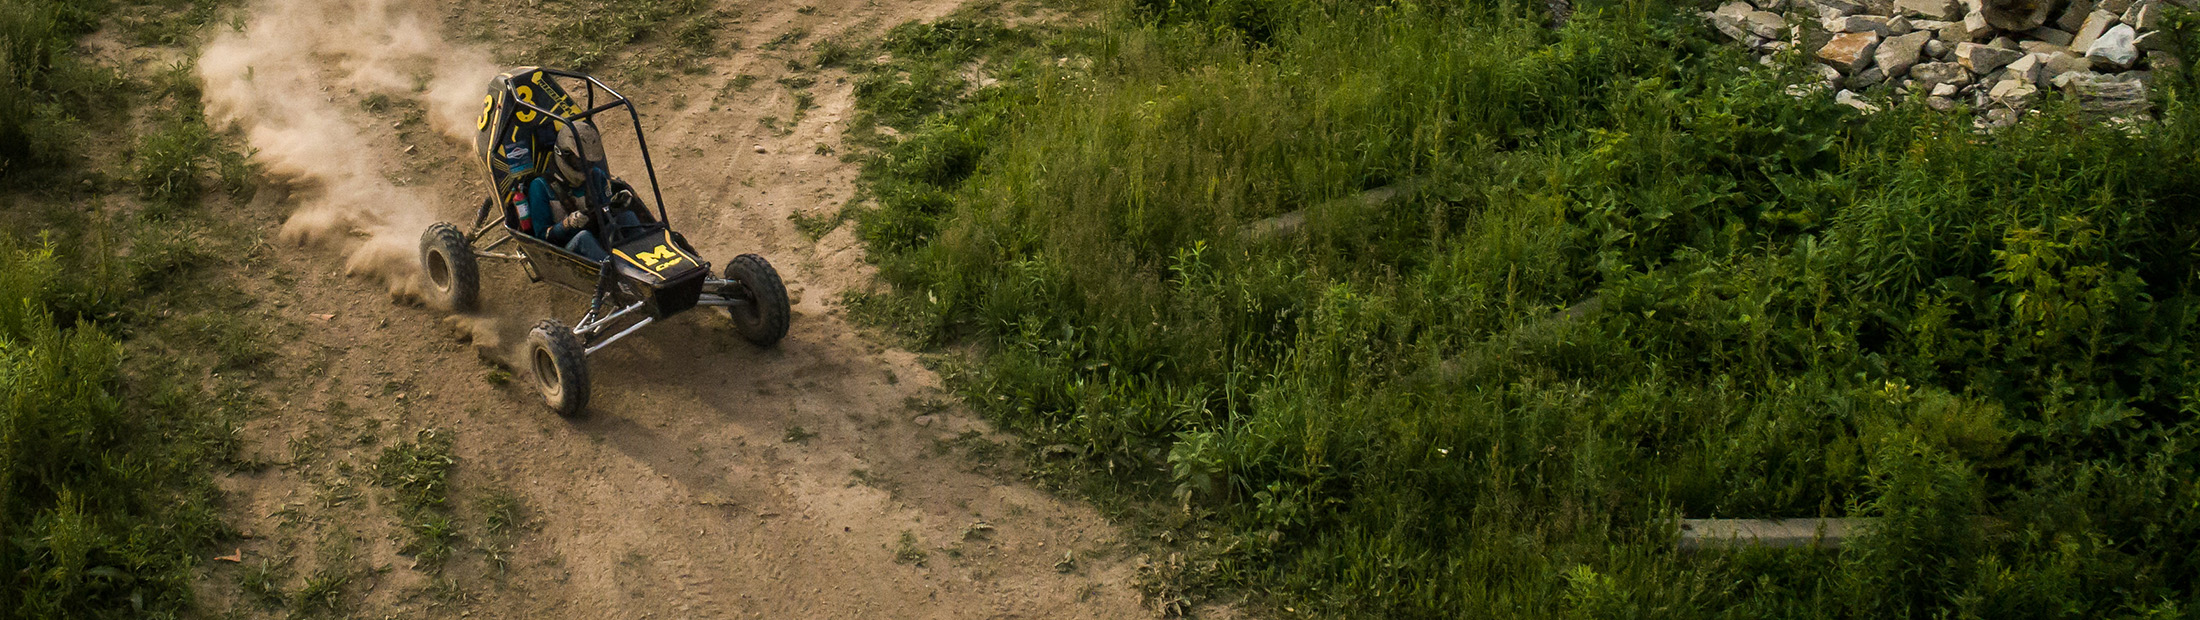 An off-road Baja racing vehicle kicks up dust on a dirt path next to some long, green grass.